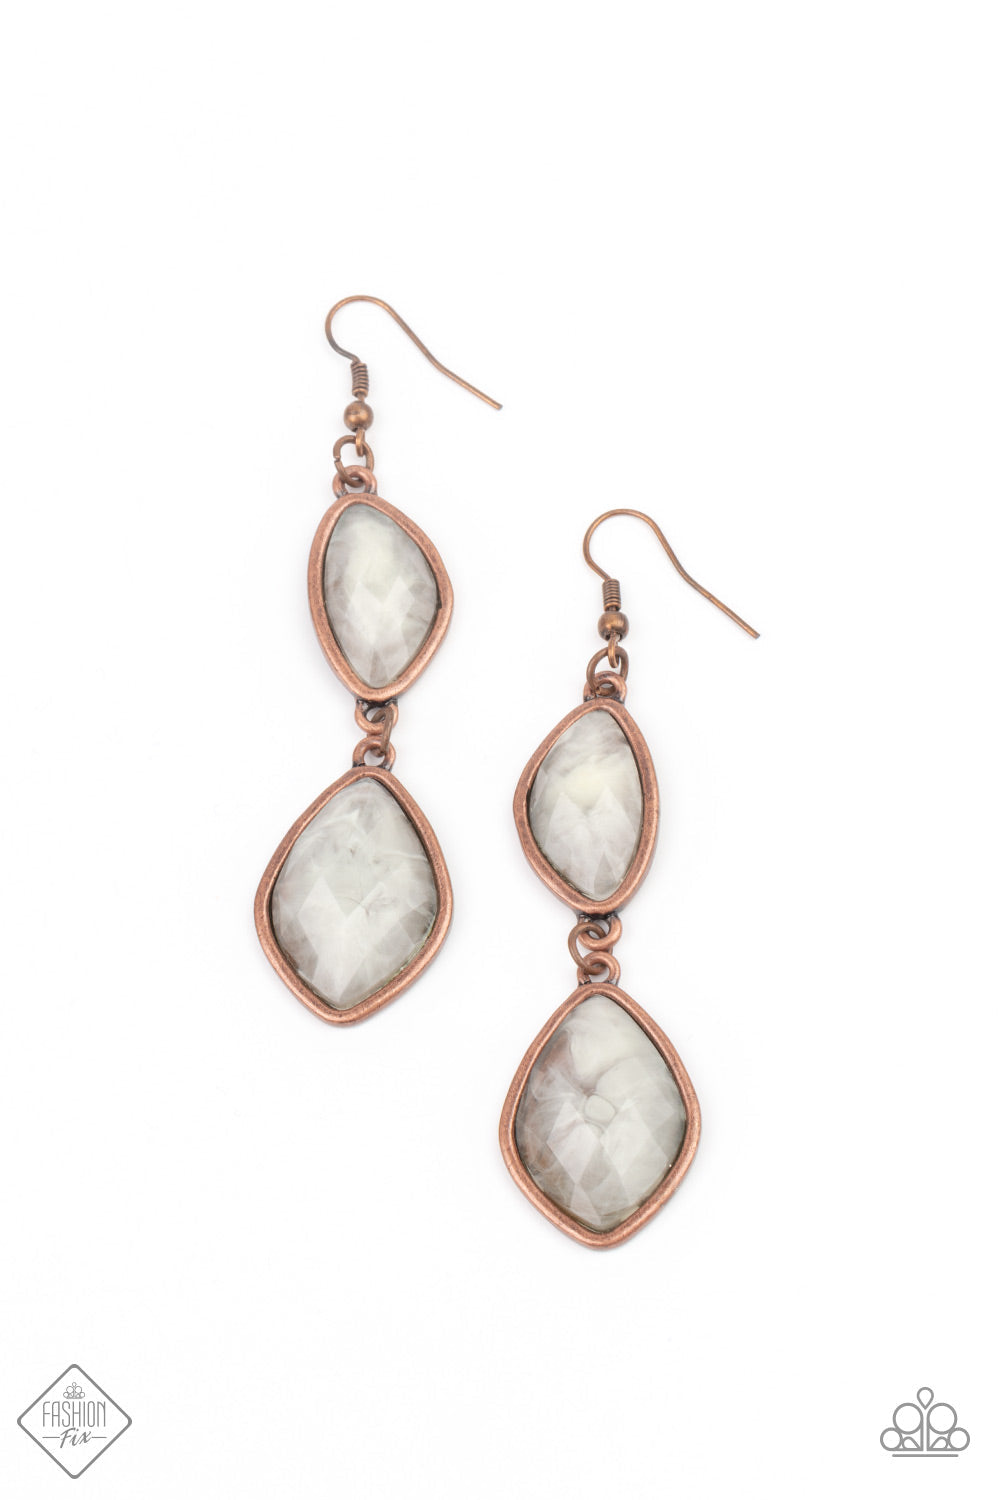 The Oracle Has Spoken - Copper Fashion Earrings - Paparazzi Accessories - Featuring dramatically faceted surfaces, cloudy faux stone beads are pressed into rustic copper frames that link into a whimsically refined lure. Earring attaches to a standard fishhook fitting. Sold as one pair of earrings.